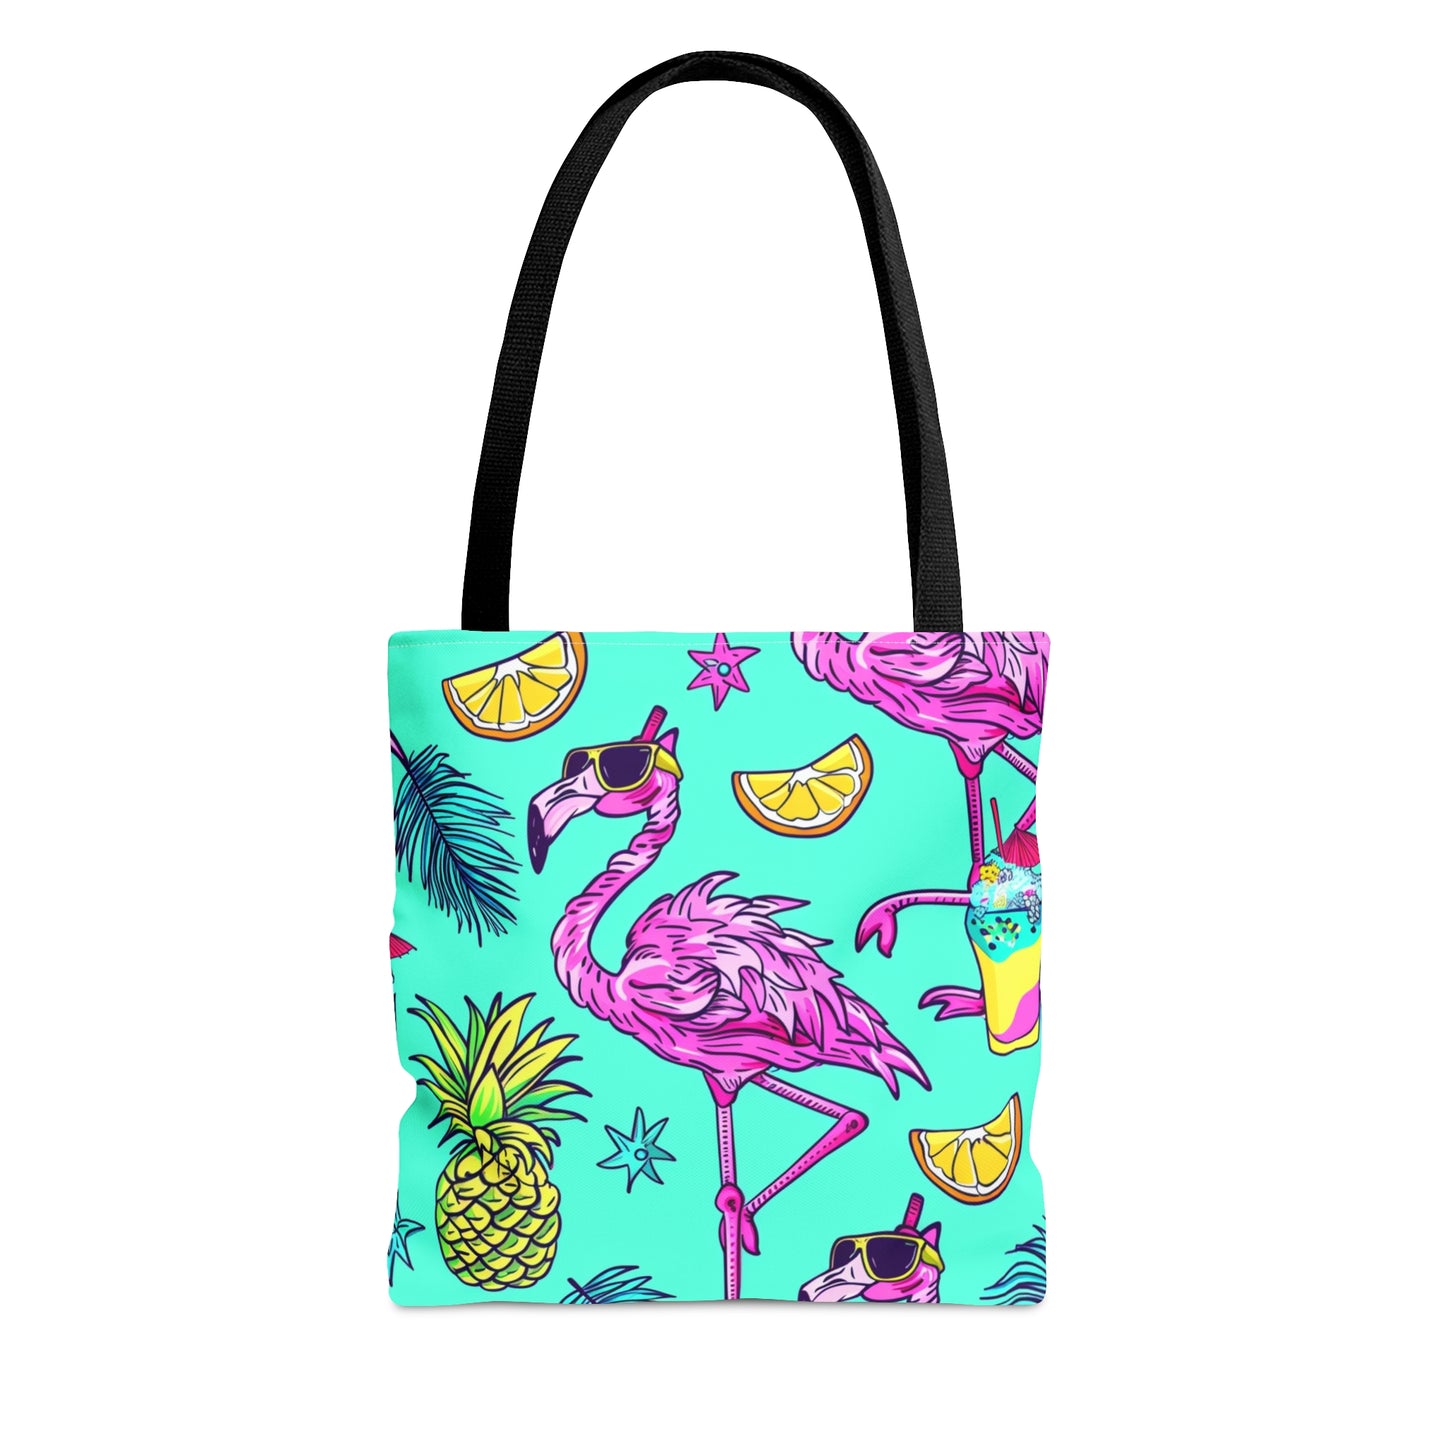 Surface Beach Volleyball Club Travel Tote Bag